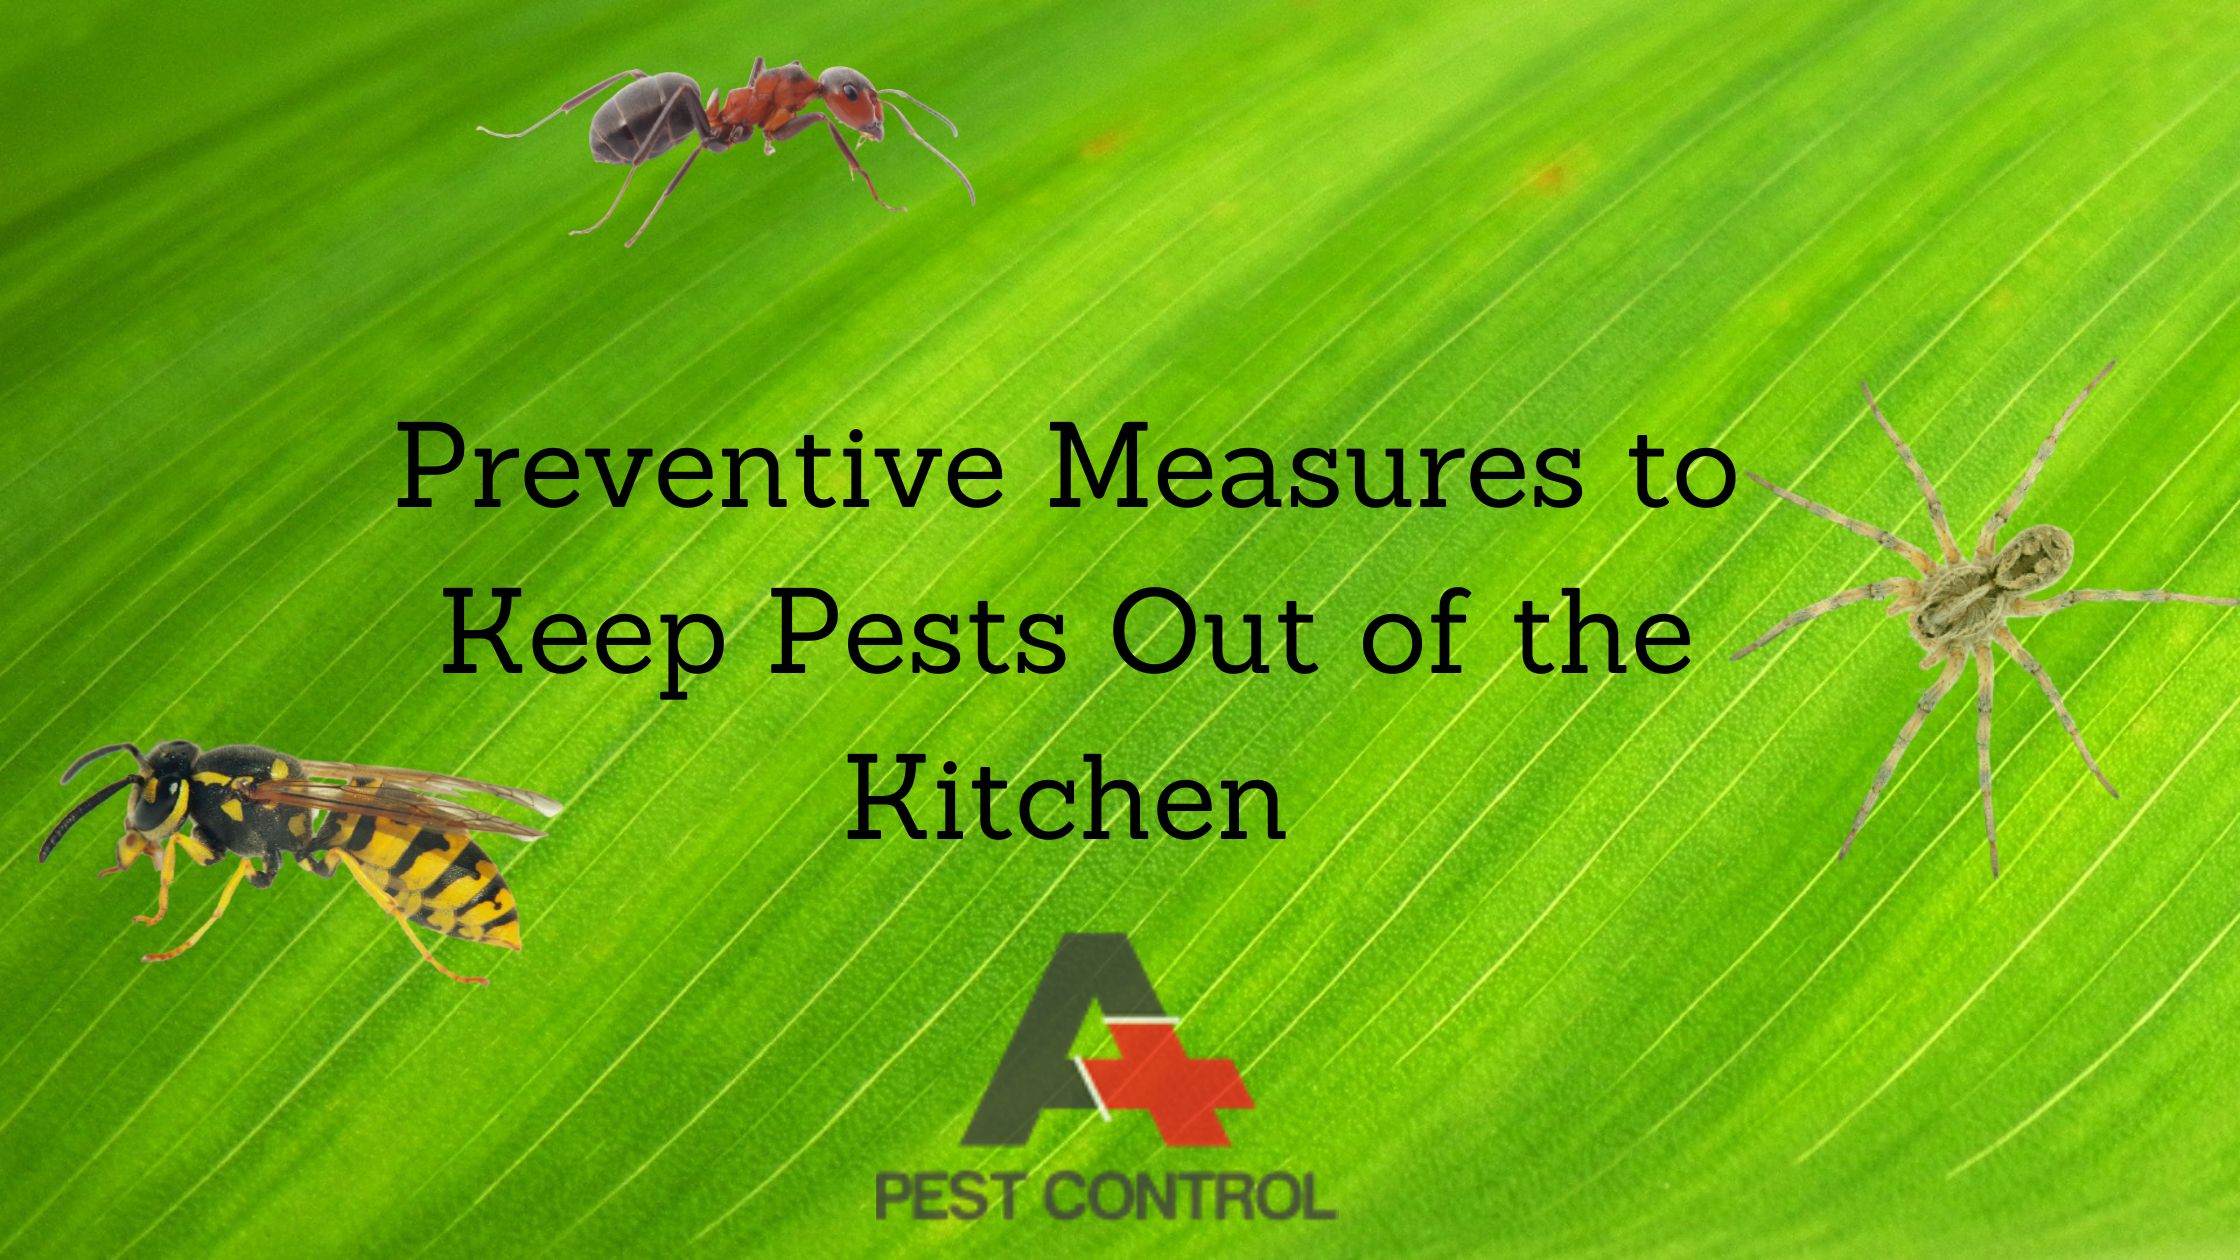 Preventive Measures to Keep Pests Out of the Kitchen